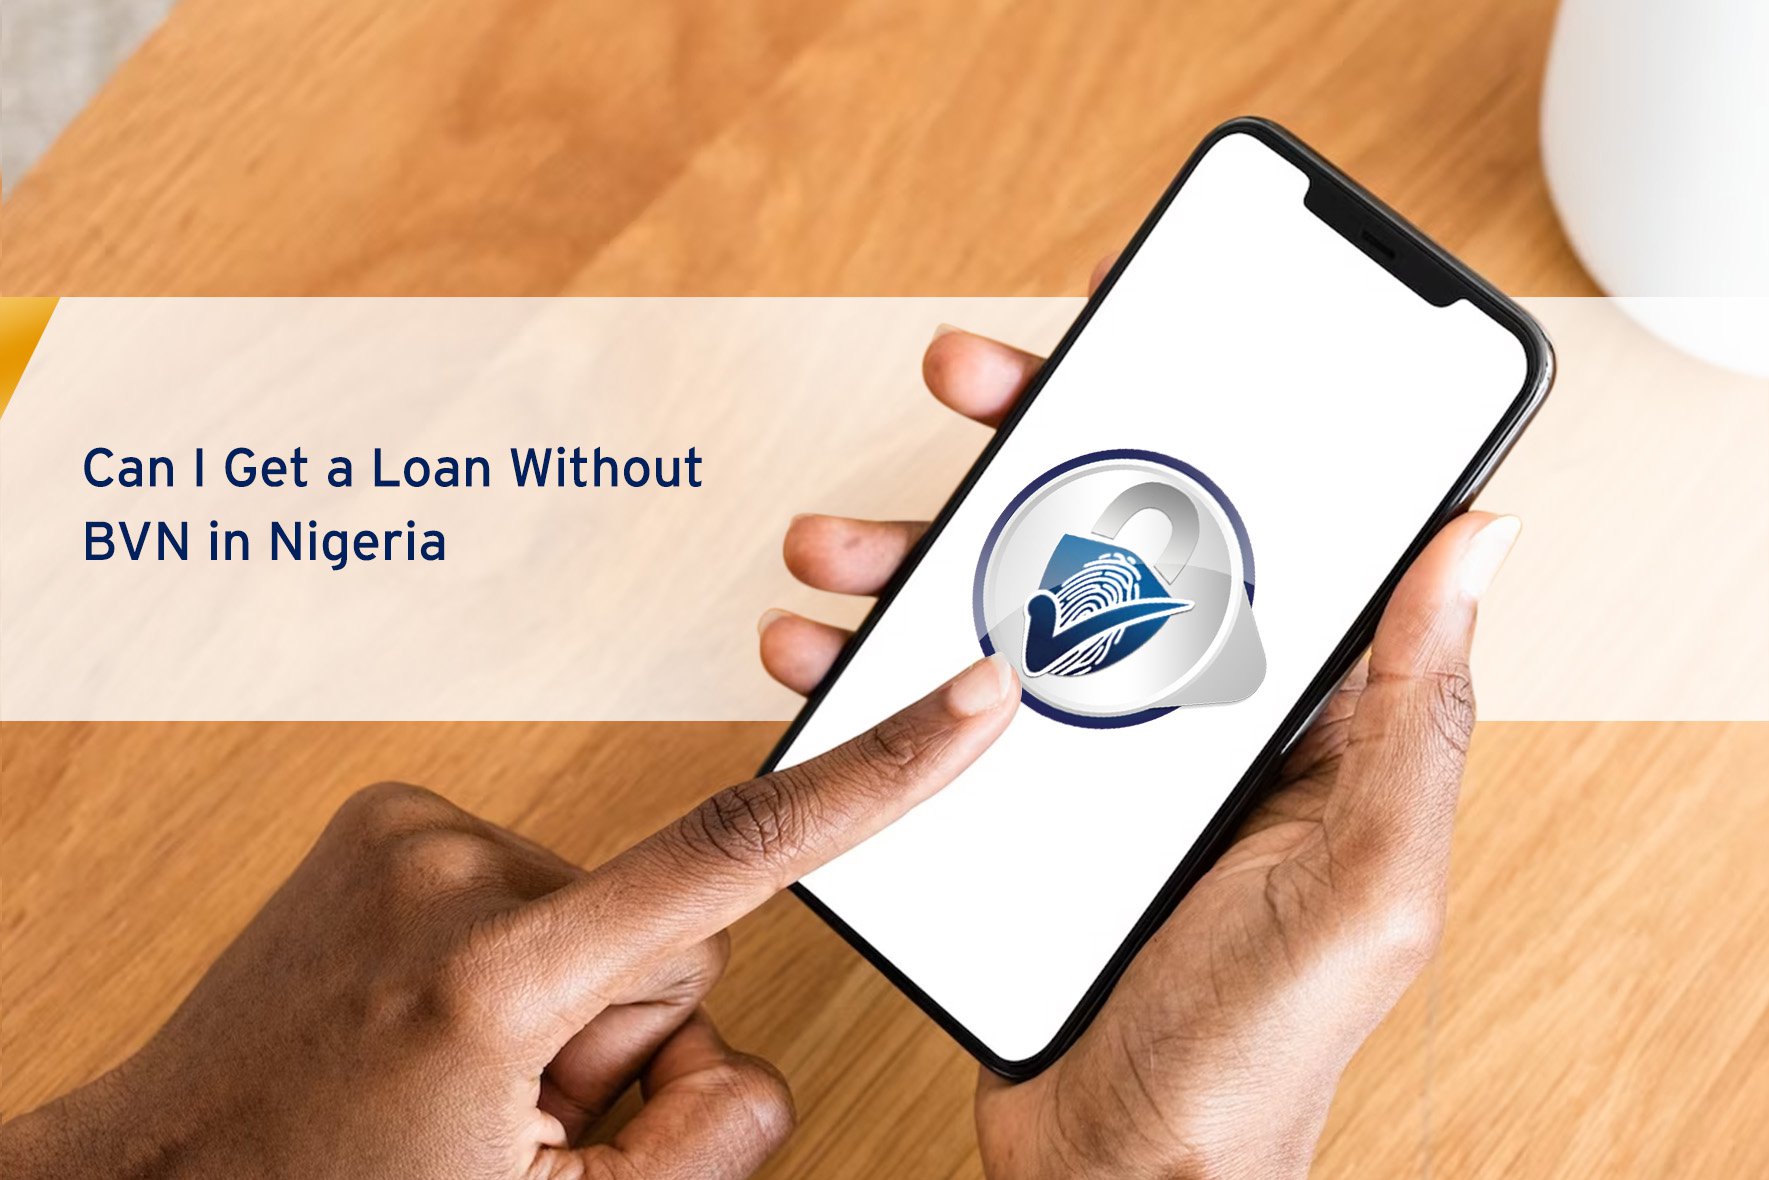 Can I get a loan without BVN in Nigeria?